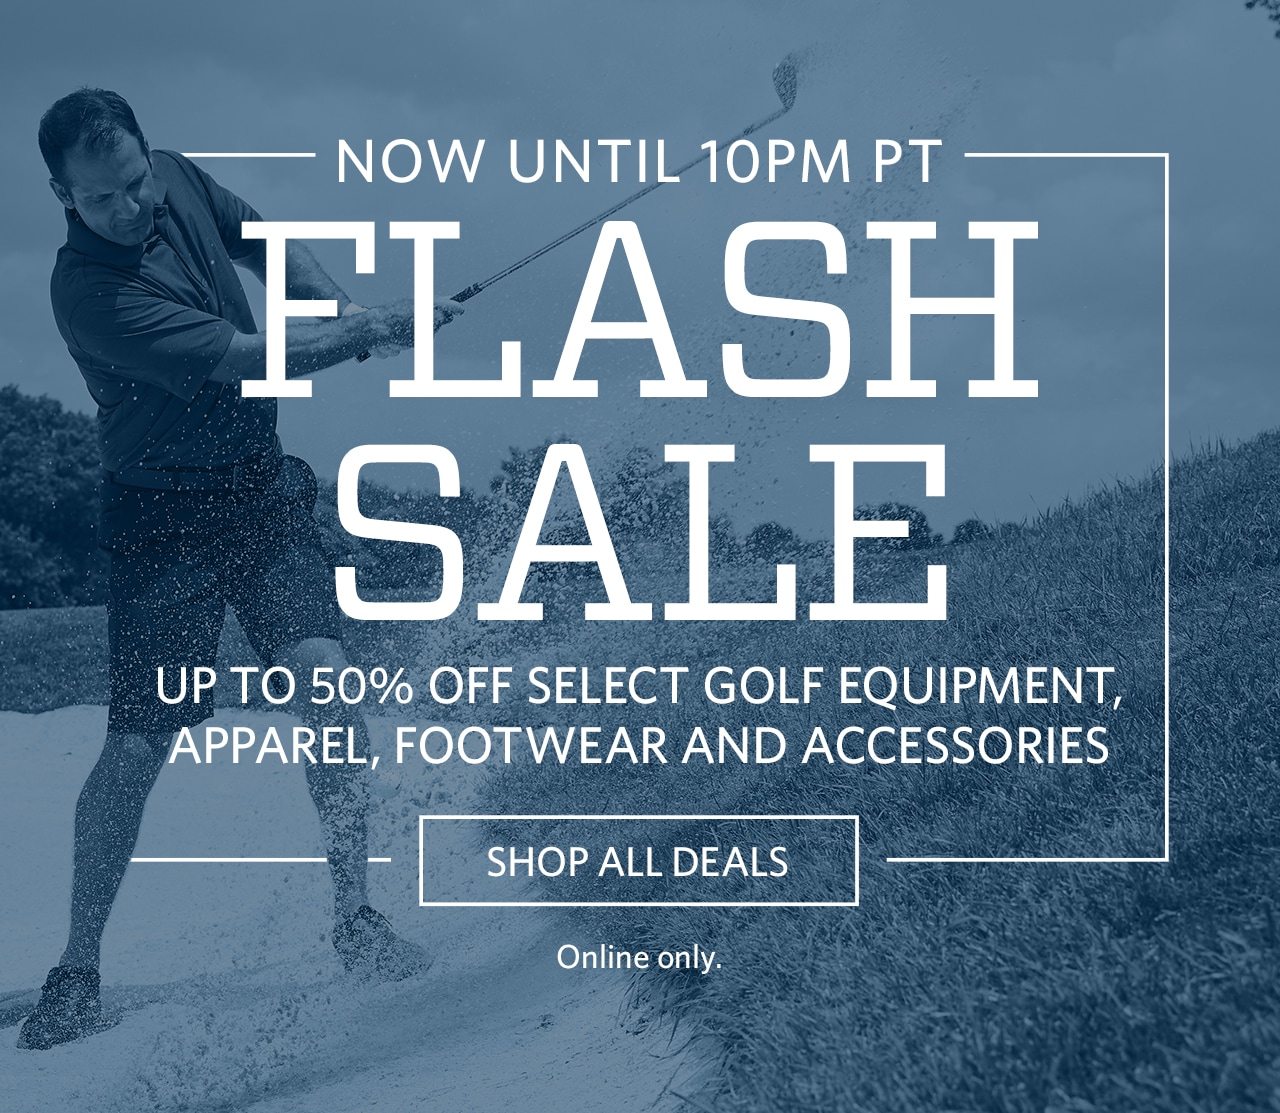 Flash Sale! Save Up to 50% Off! On Select Items. Online Only. Valid through 10PM PT Today Only. Shop All Deals.